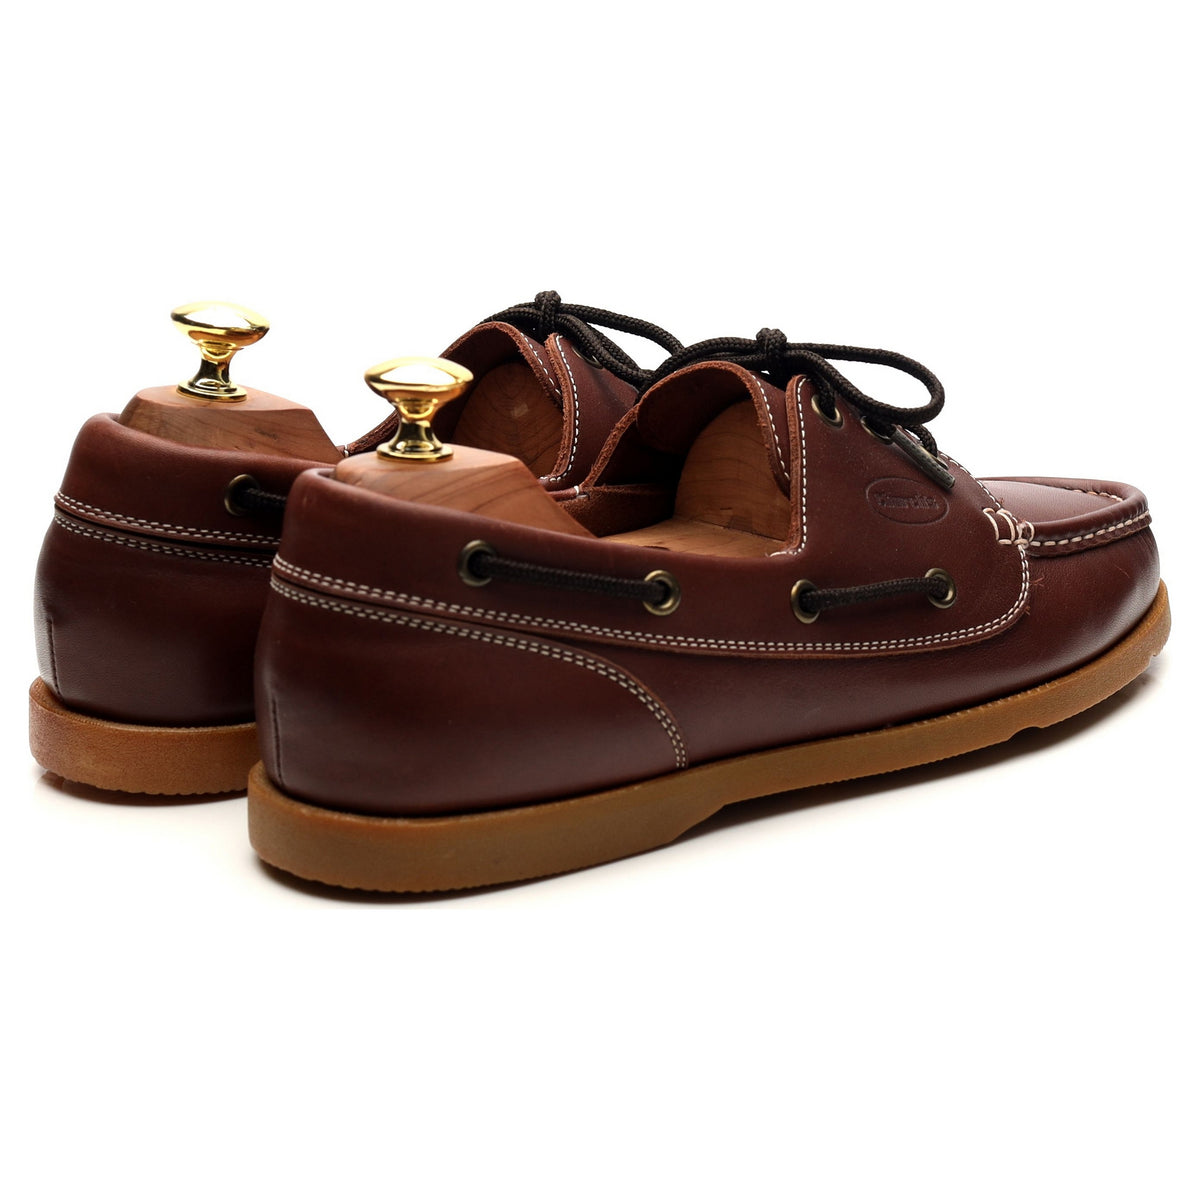 Brown Leather Boat Shoes UK 8.5